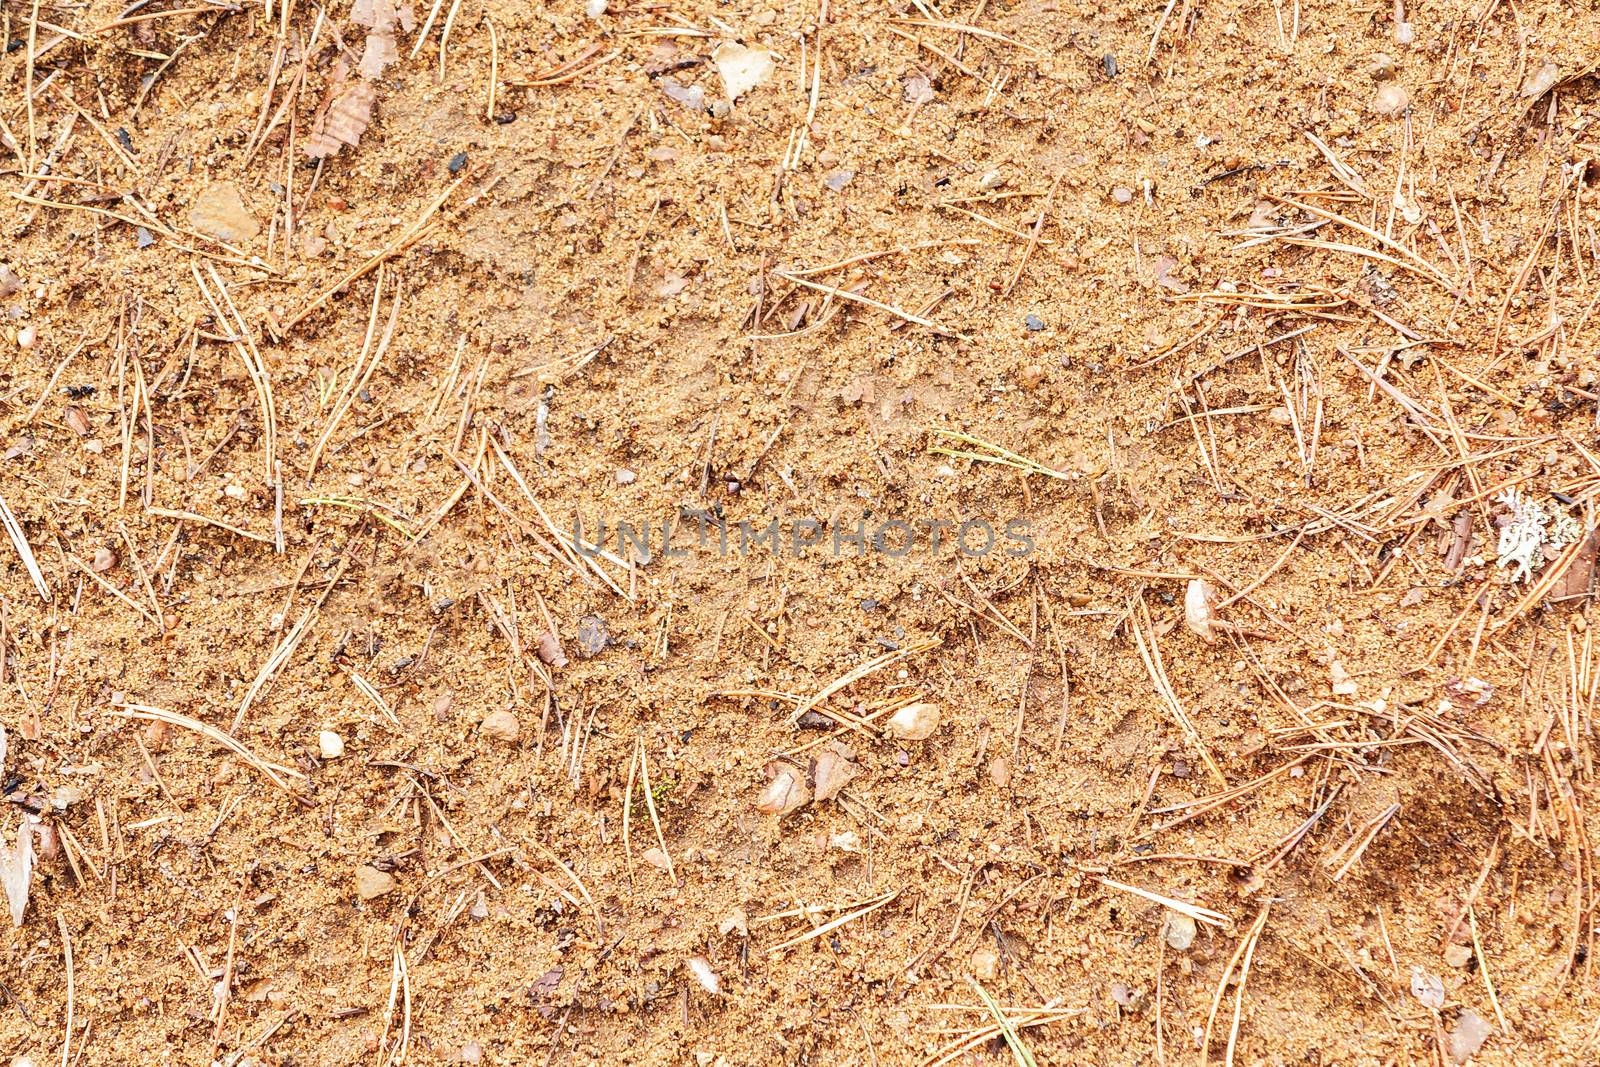 Texture of the forest floor - sand and pine needles by galsand